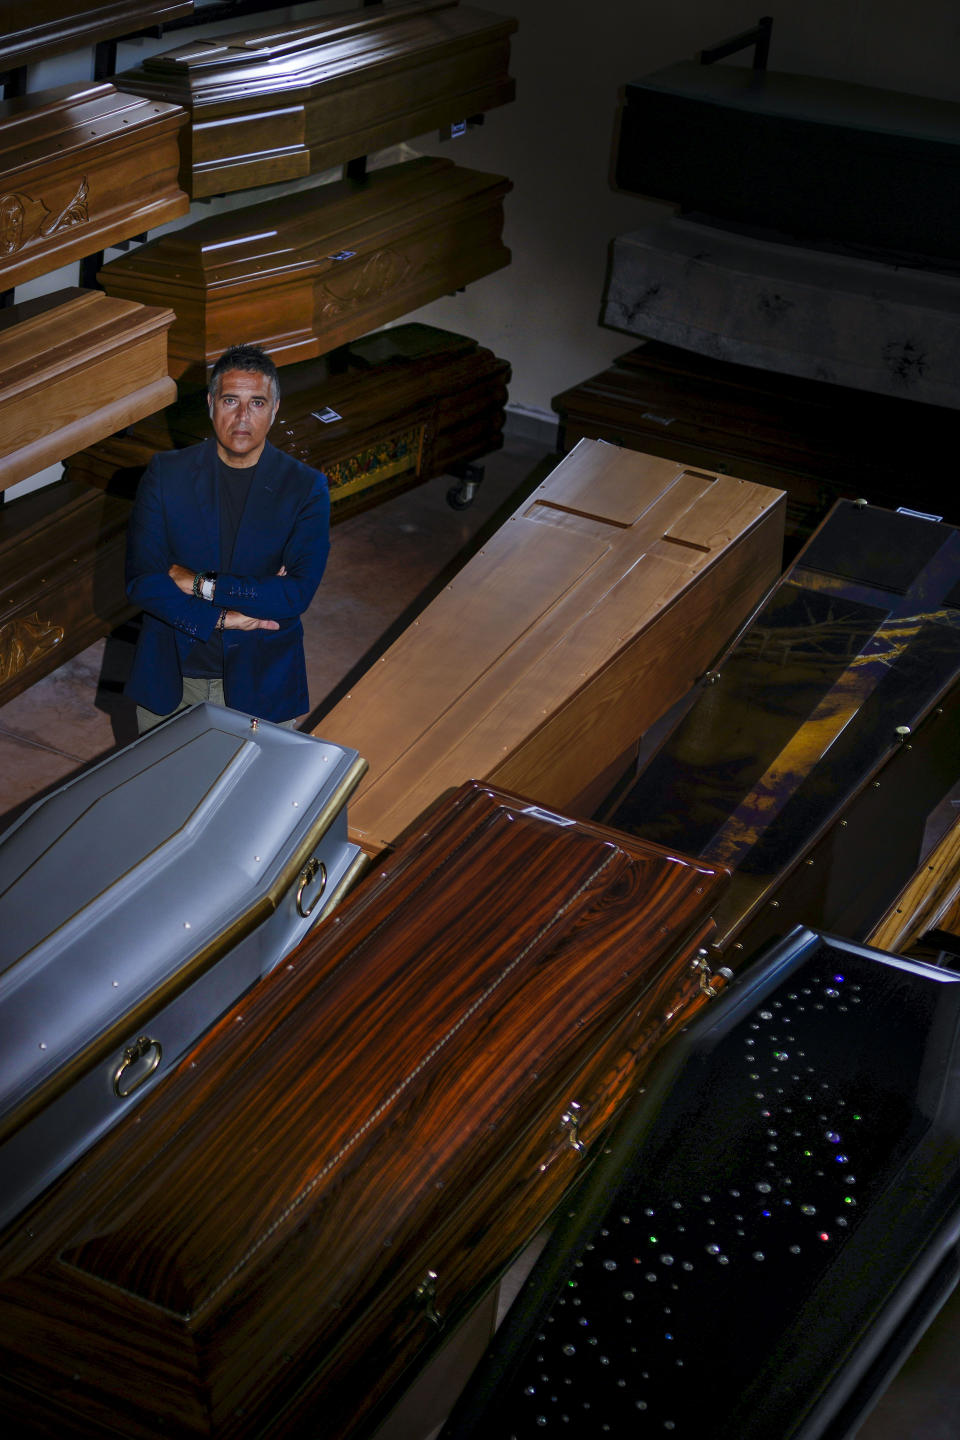 Antonio Ruggieri poses in his funeal home in Voltarrosto, near Teramo in central Italy, Monday, June 5, 2023. The majority of Italians still want a church funeral, even as most don’t attend Mass regularly. (AP Photo/Domenico Stinellis)